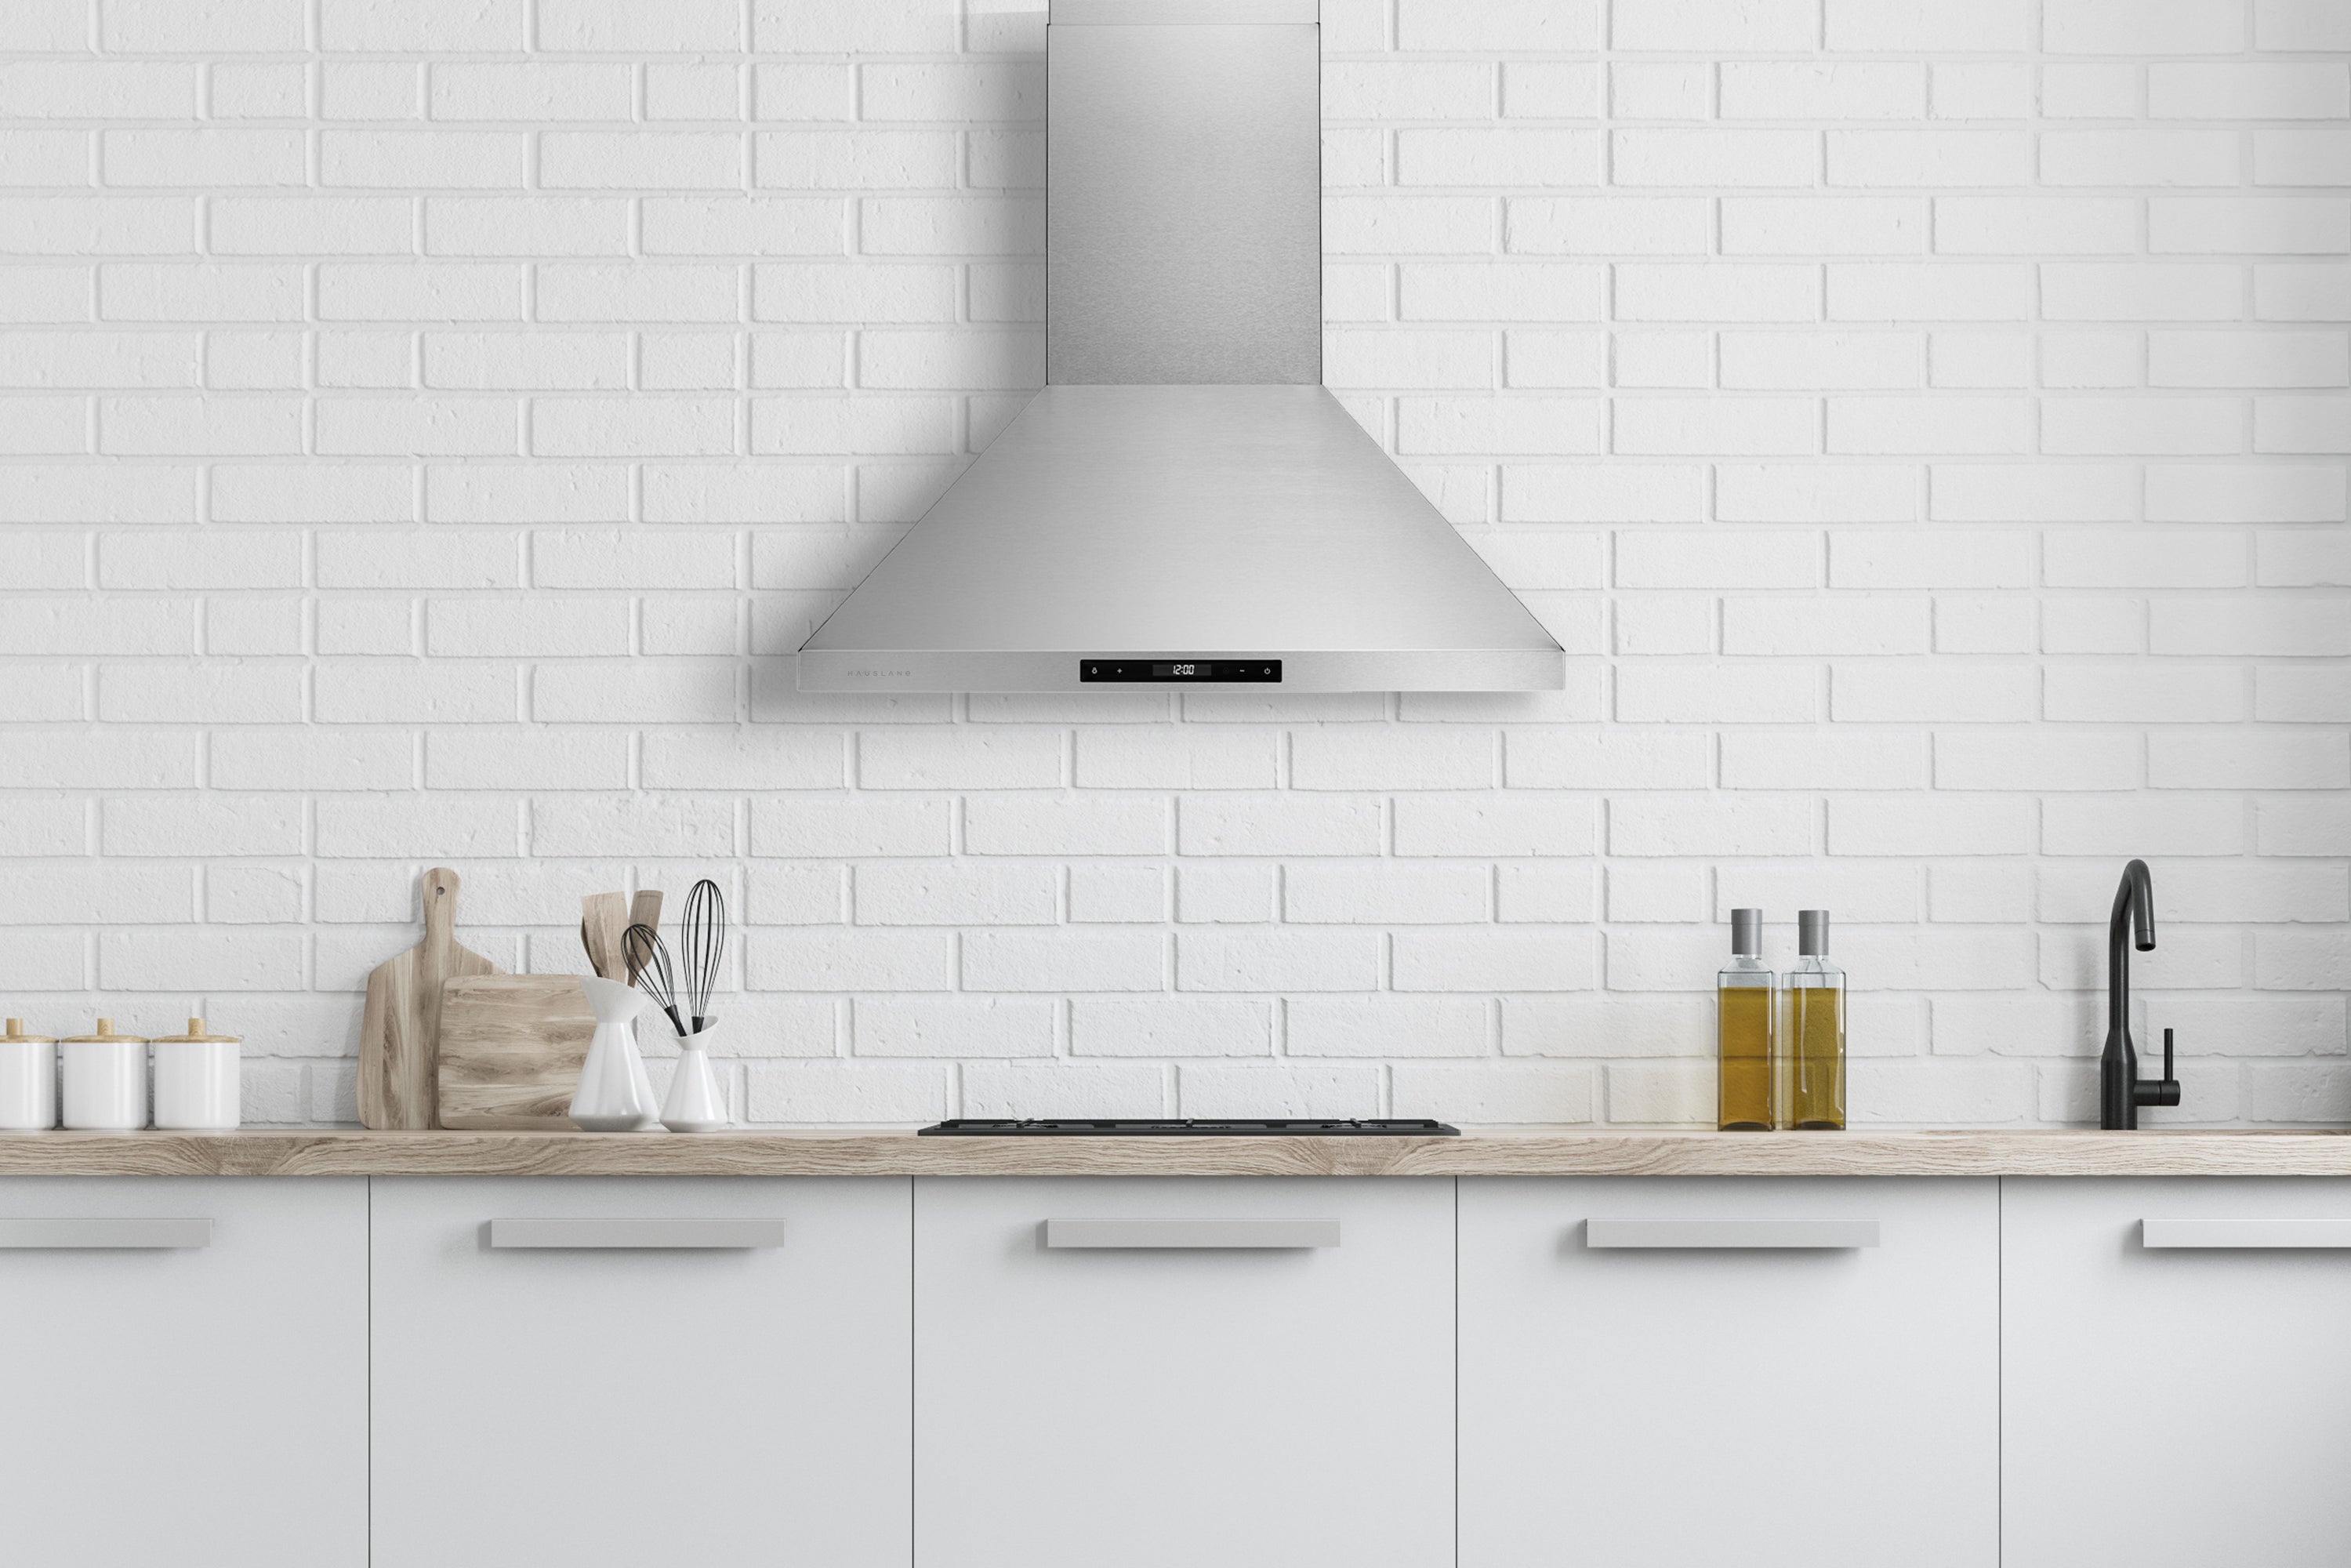 Types of Kitchen Exhaust Fans: What's the Difference?